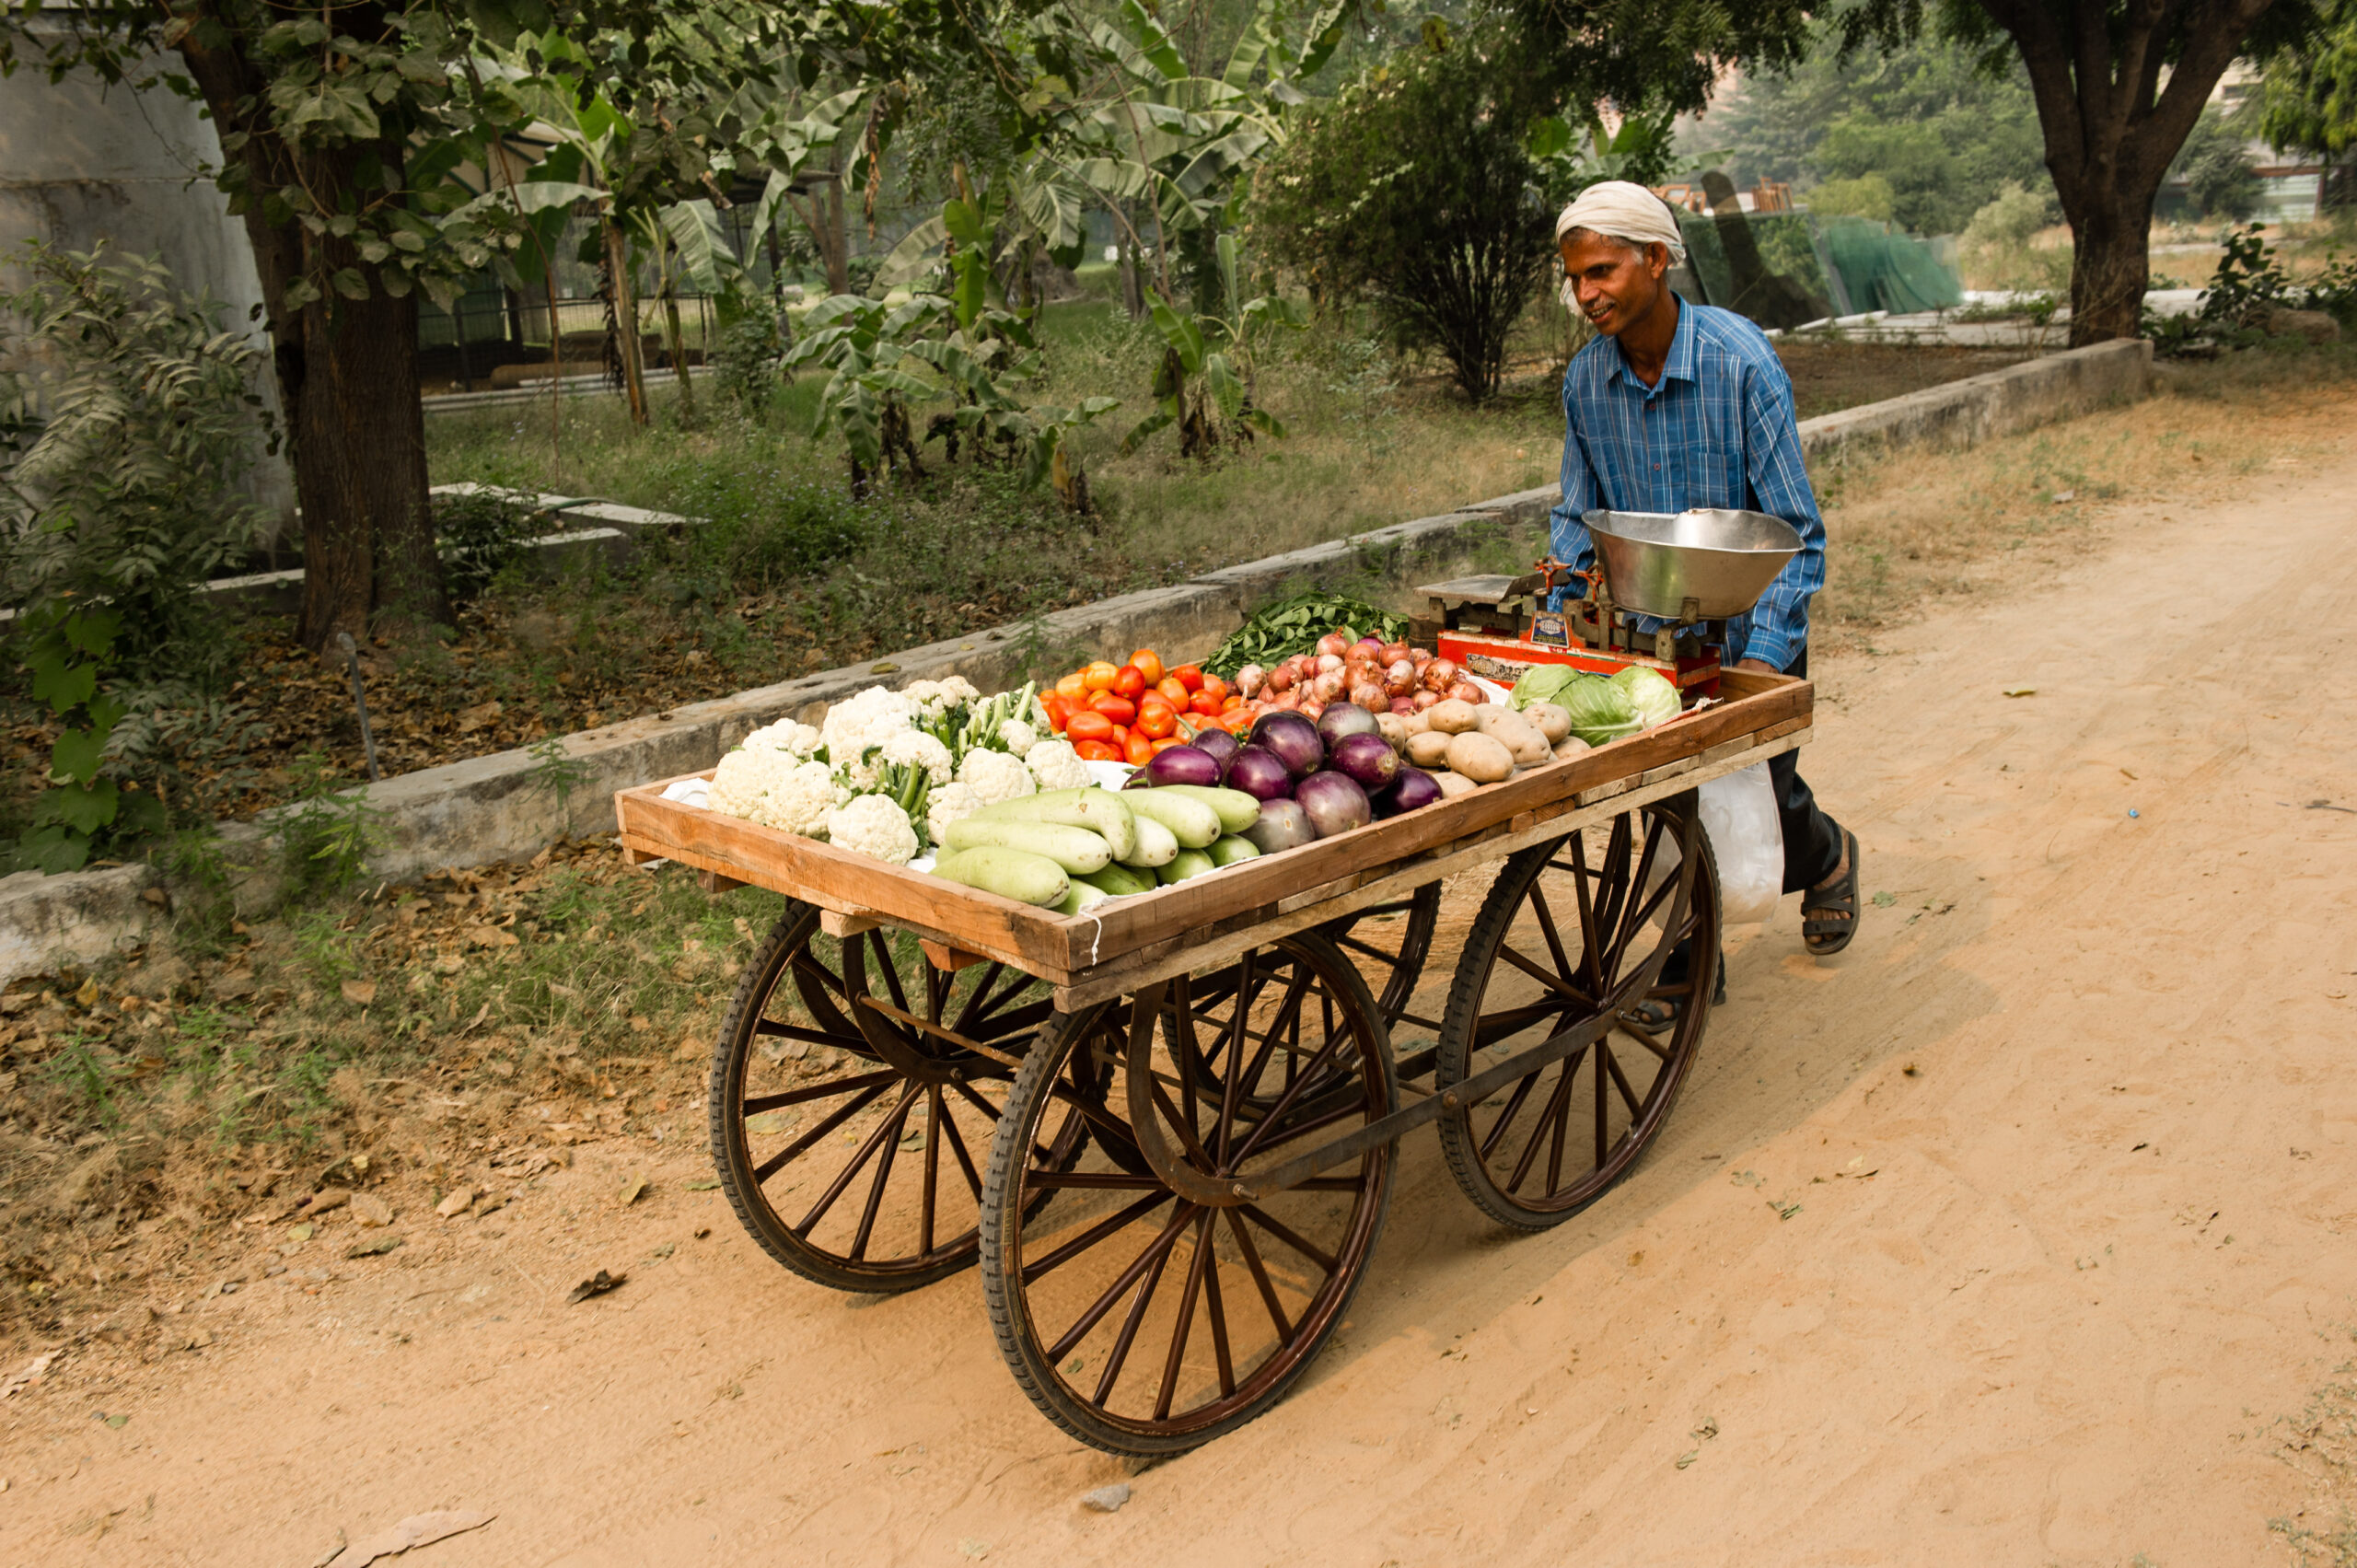 A man pushing a gifted cart